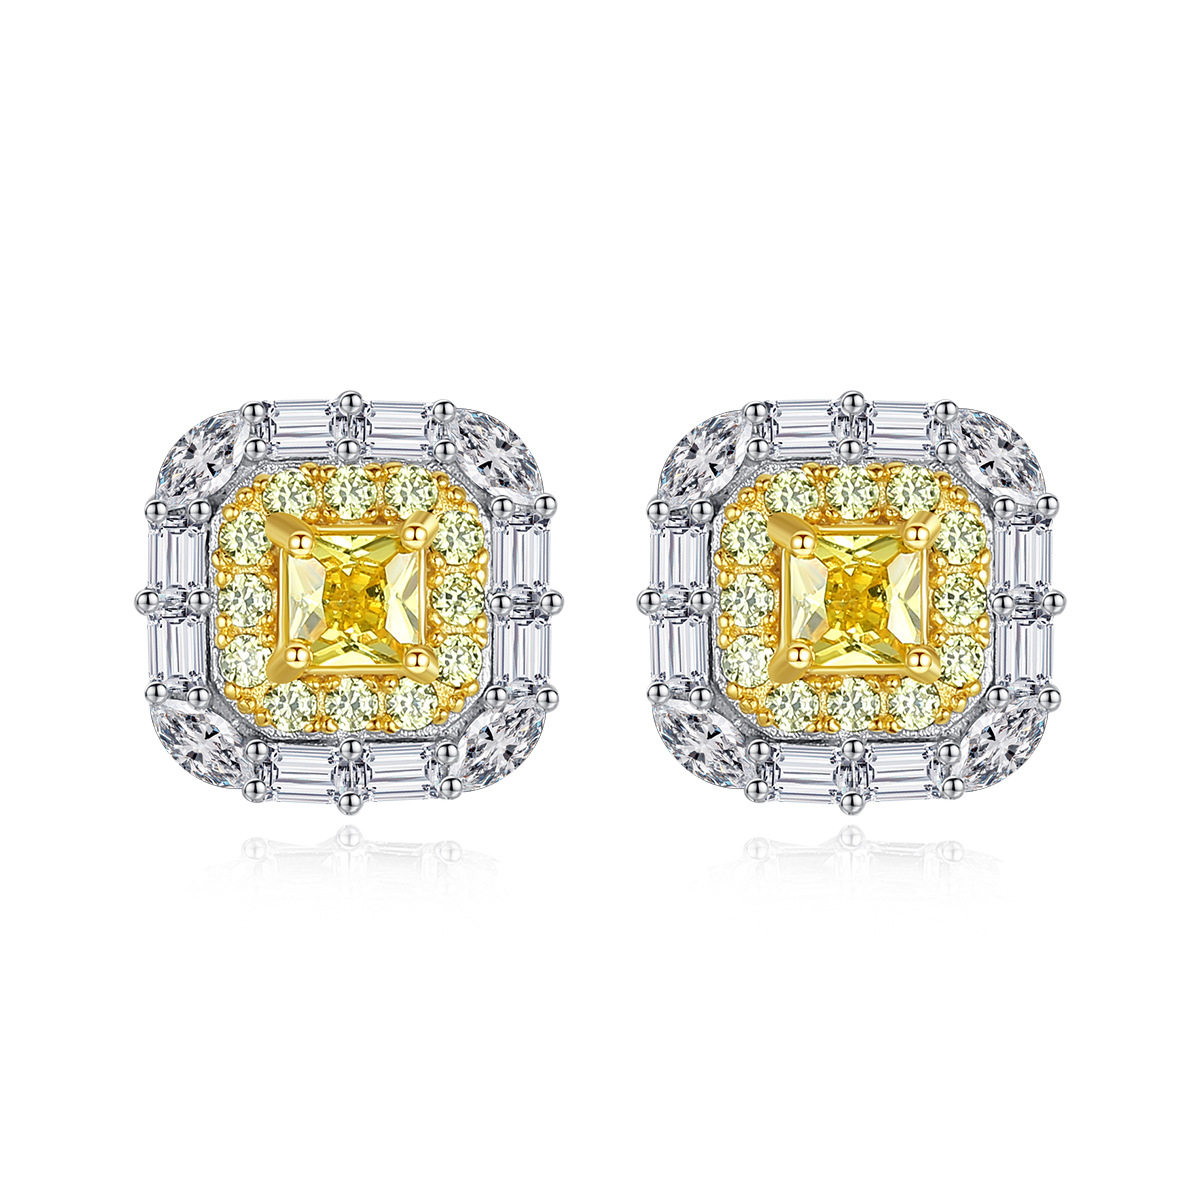 Cz Micro-Inlaid Color Treasure Square  Stud Sterling Silver Earrings